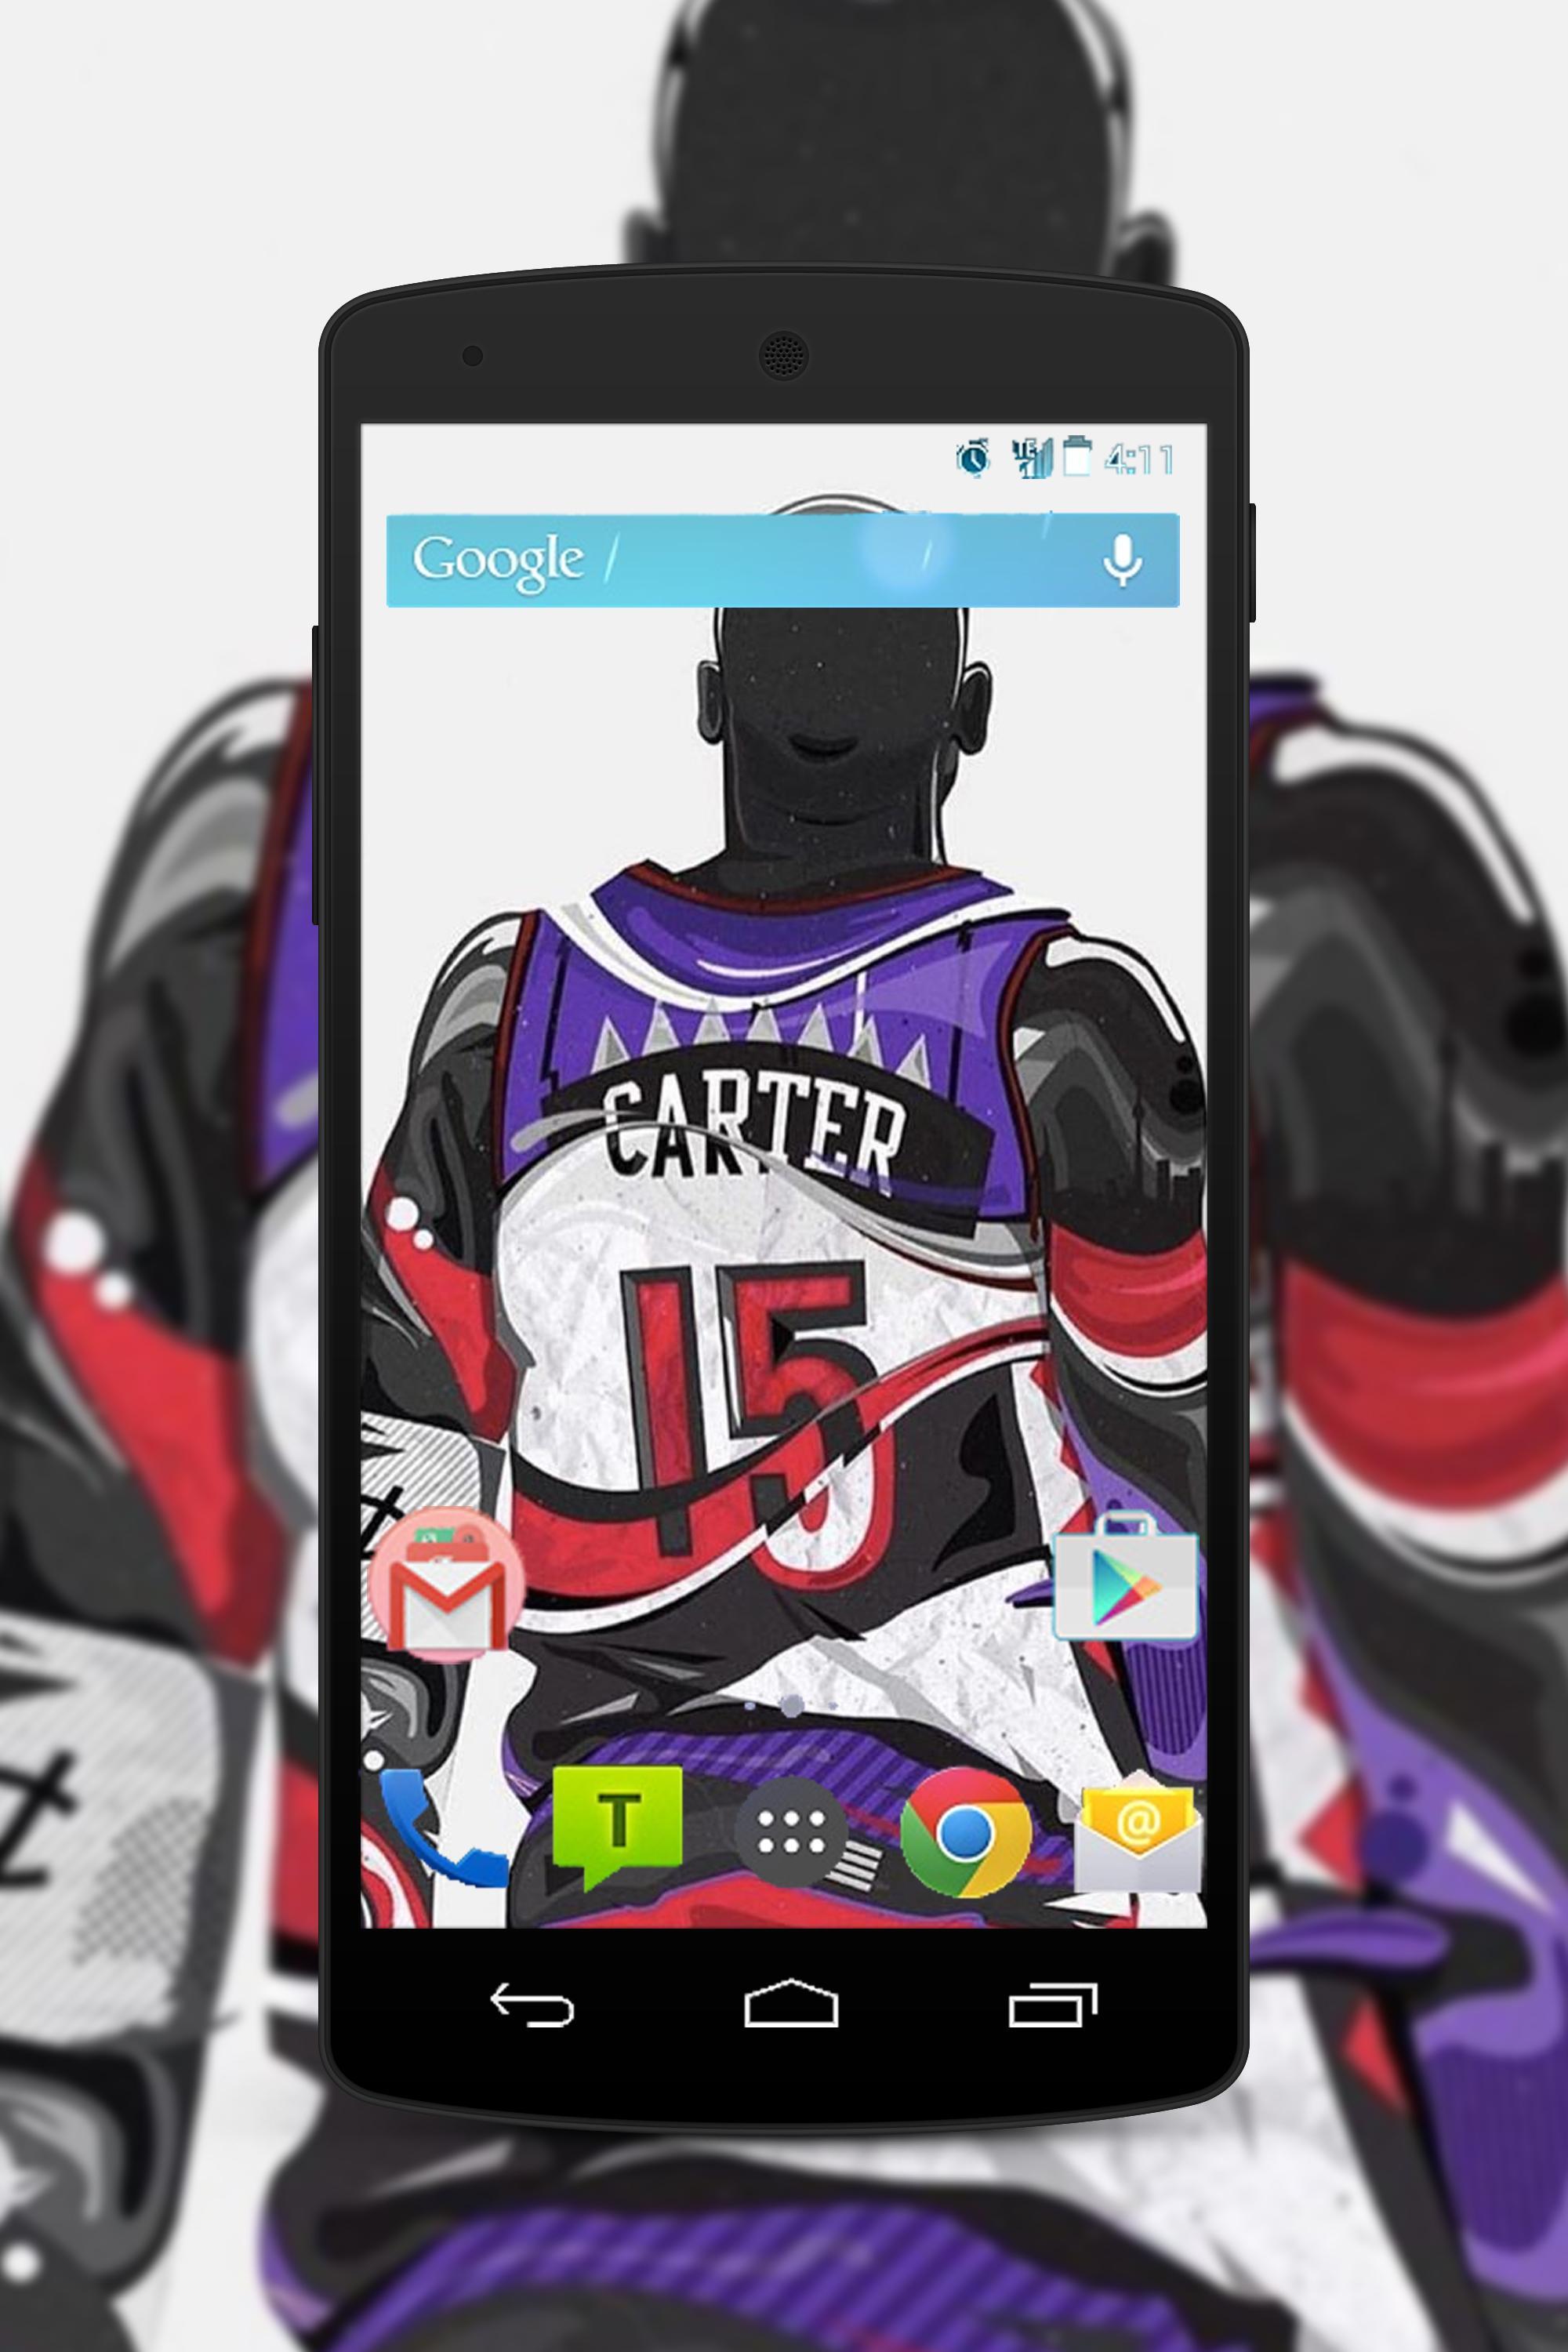 Vince Carter Wallpaper Fans Hd For Android Apk Download Images, Photos, Reviews